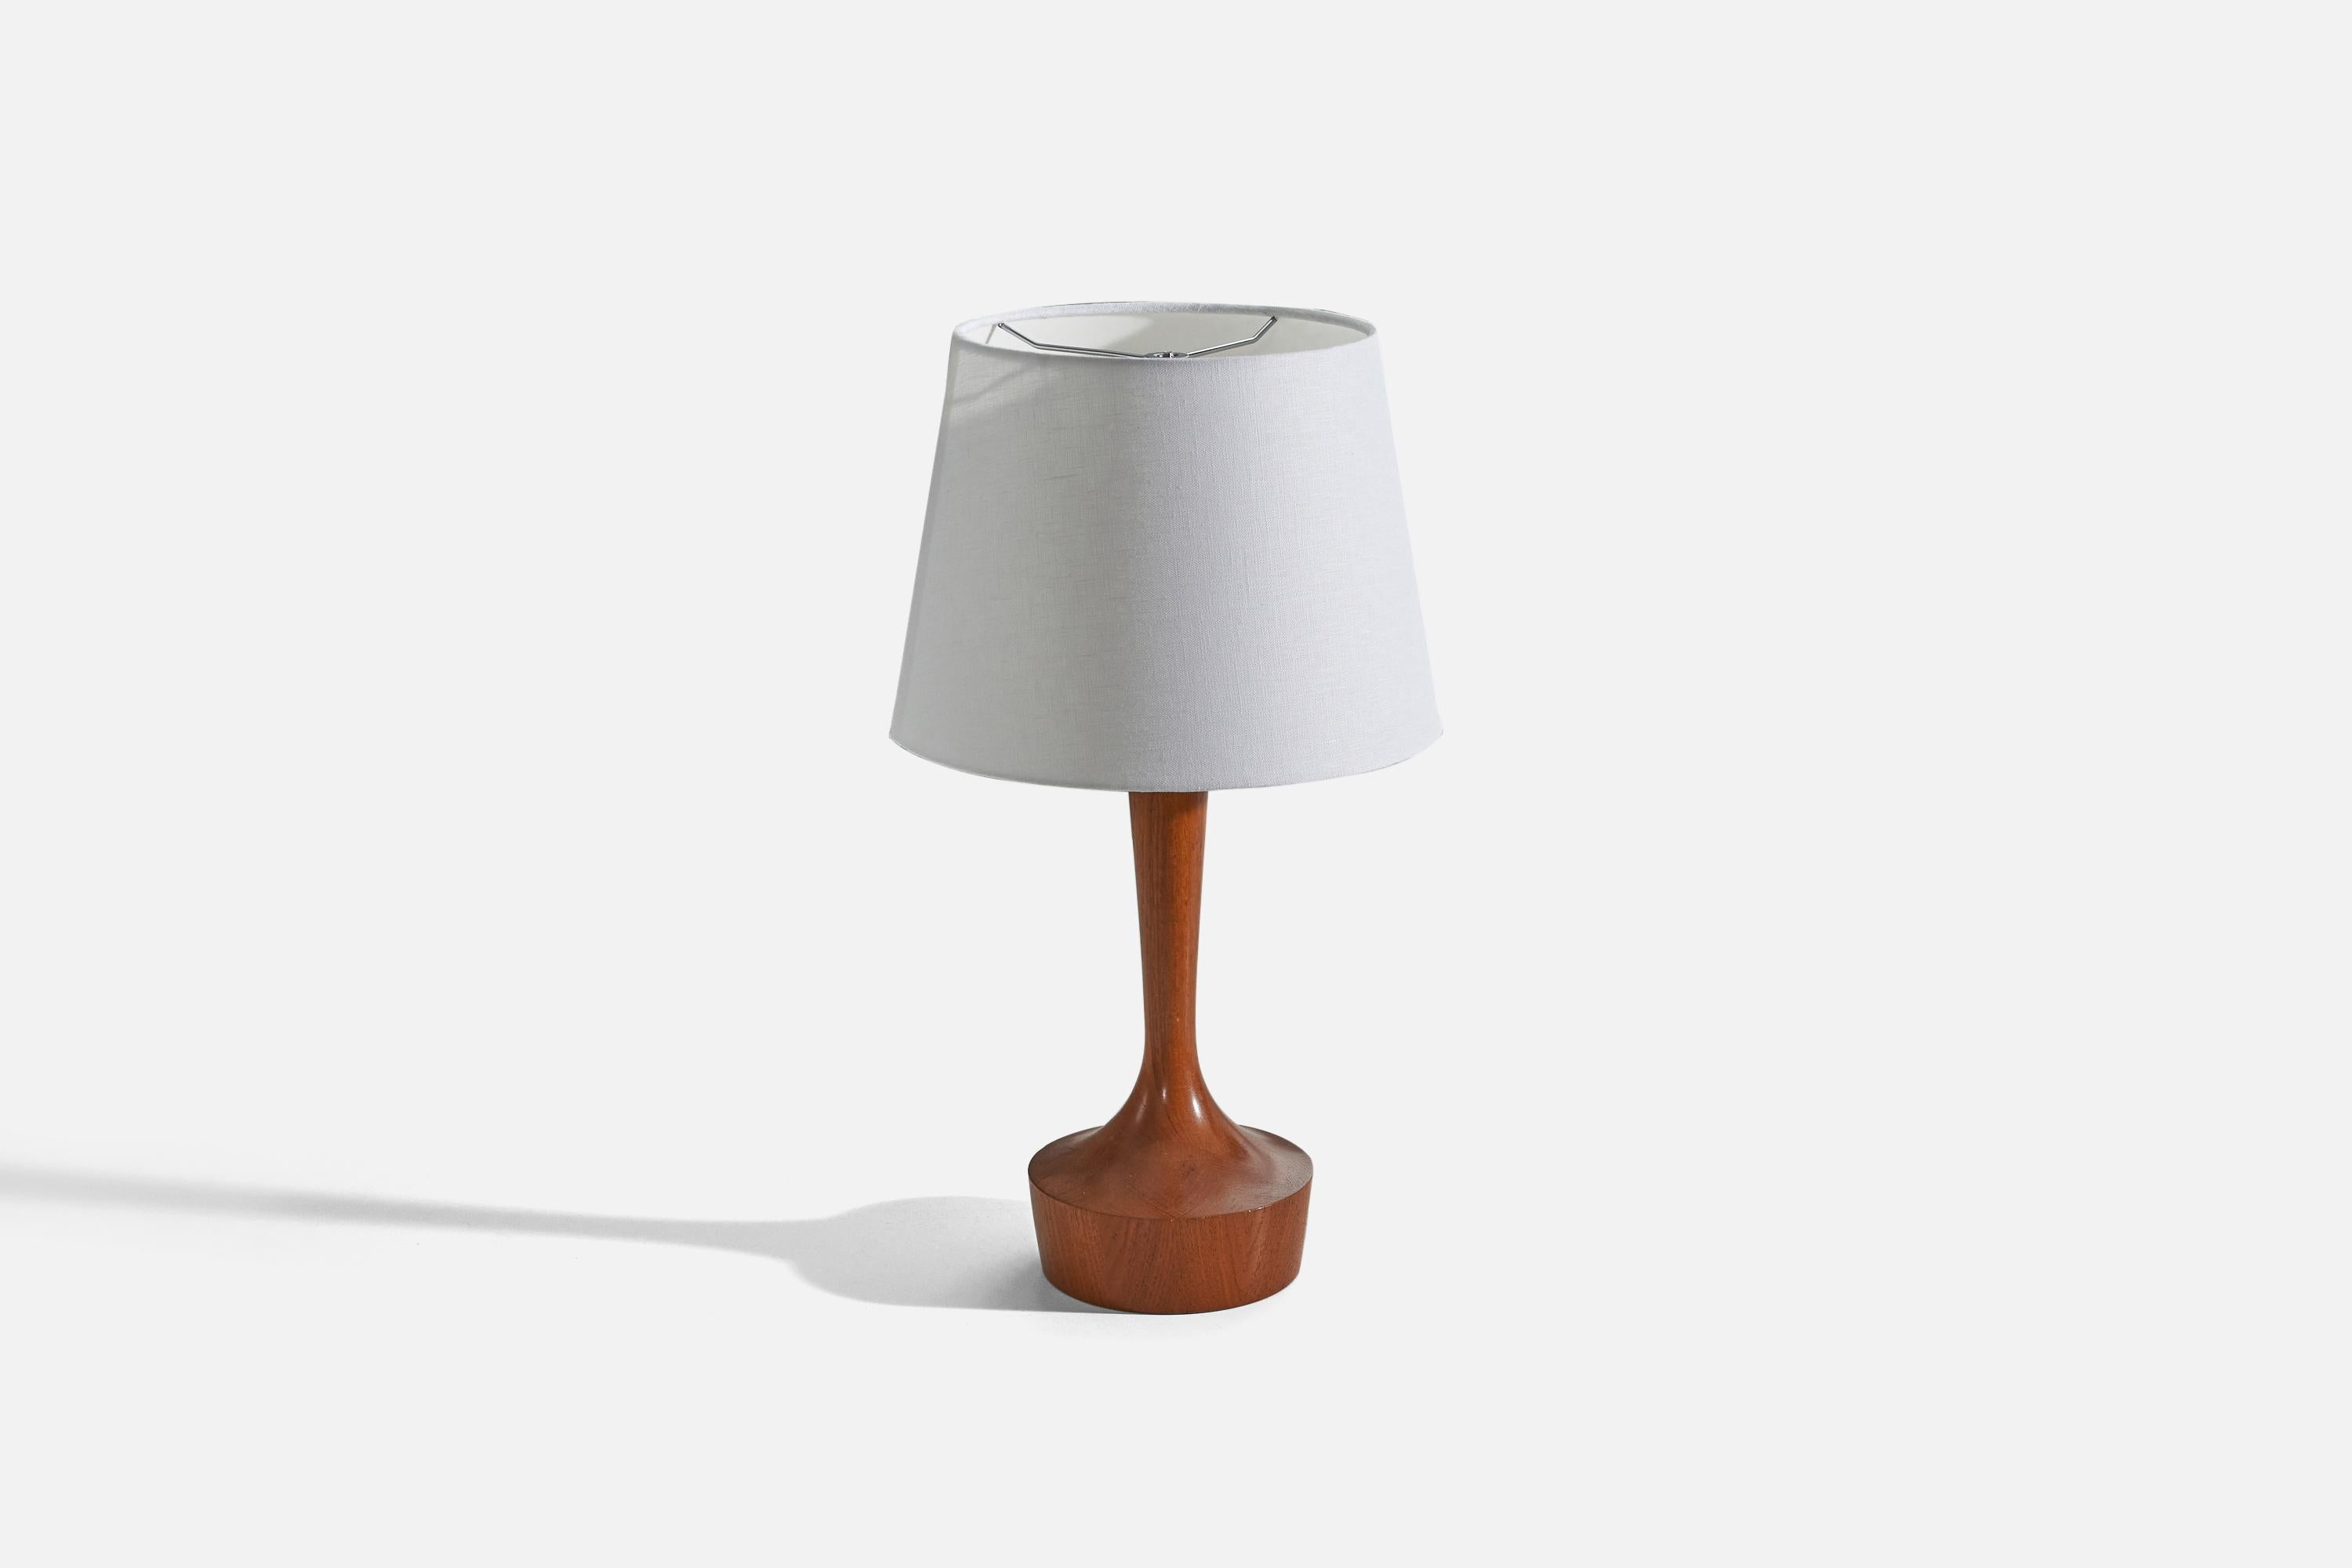 Danish Designer, Table Lamp, Solid Teak, Denmark, 1950s In Good Condition For Sale In High Point, NC